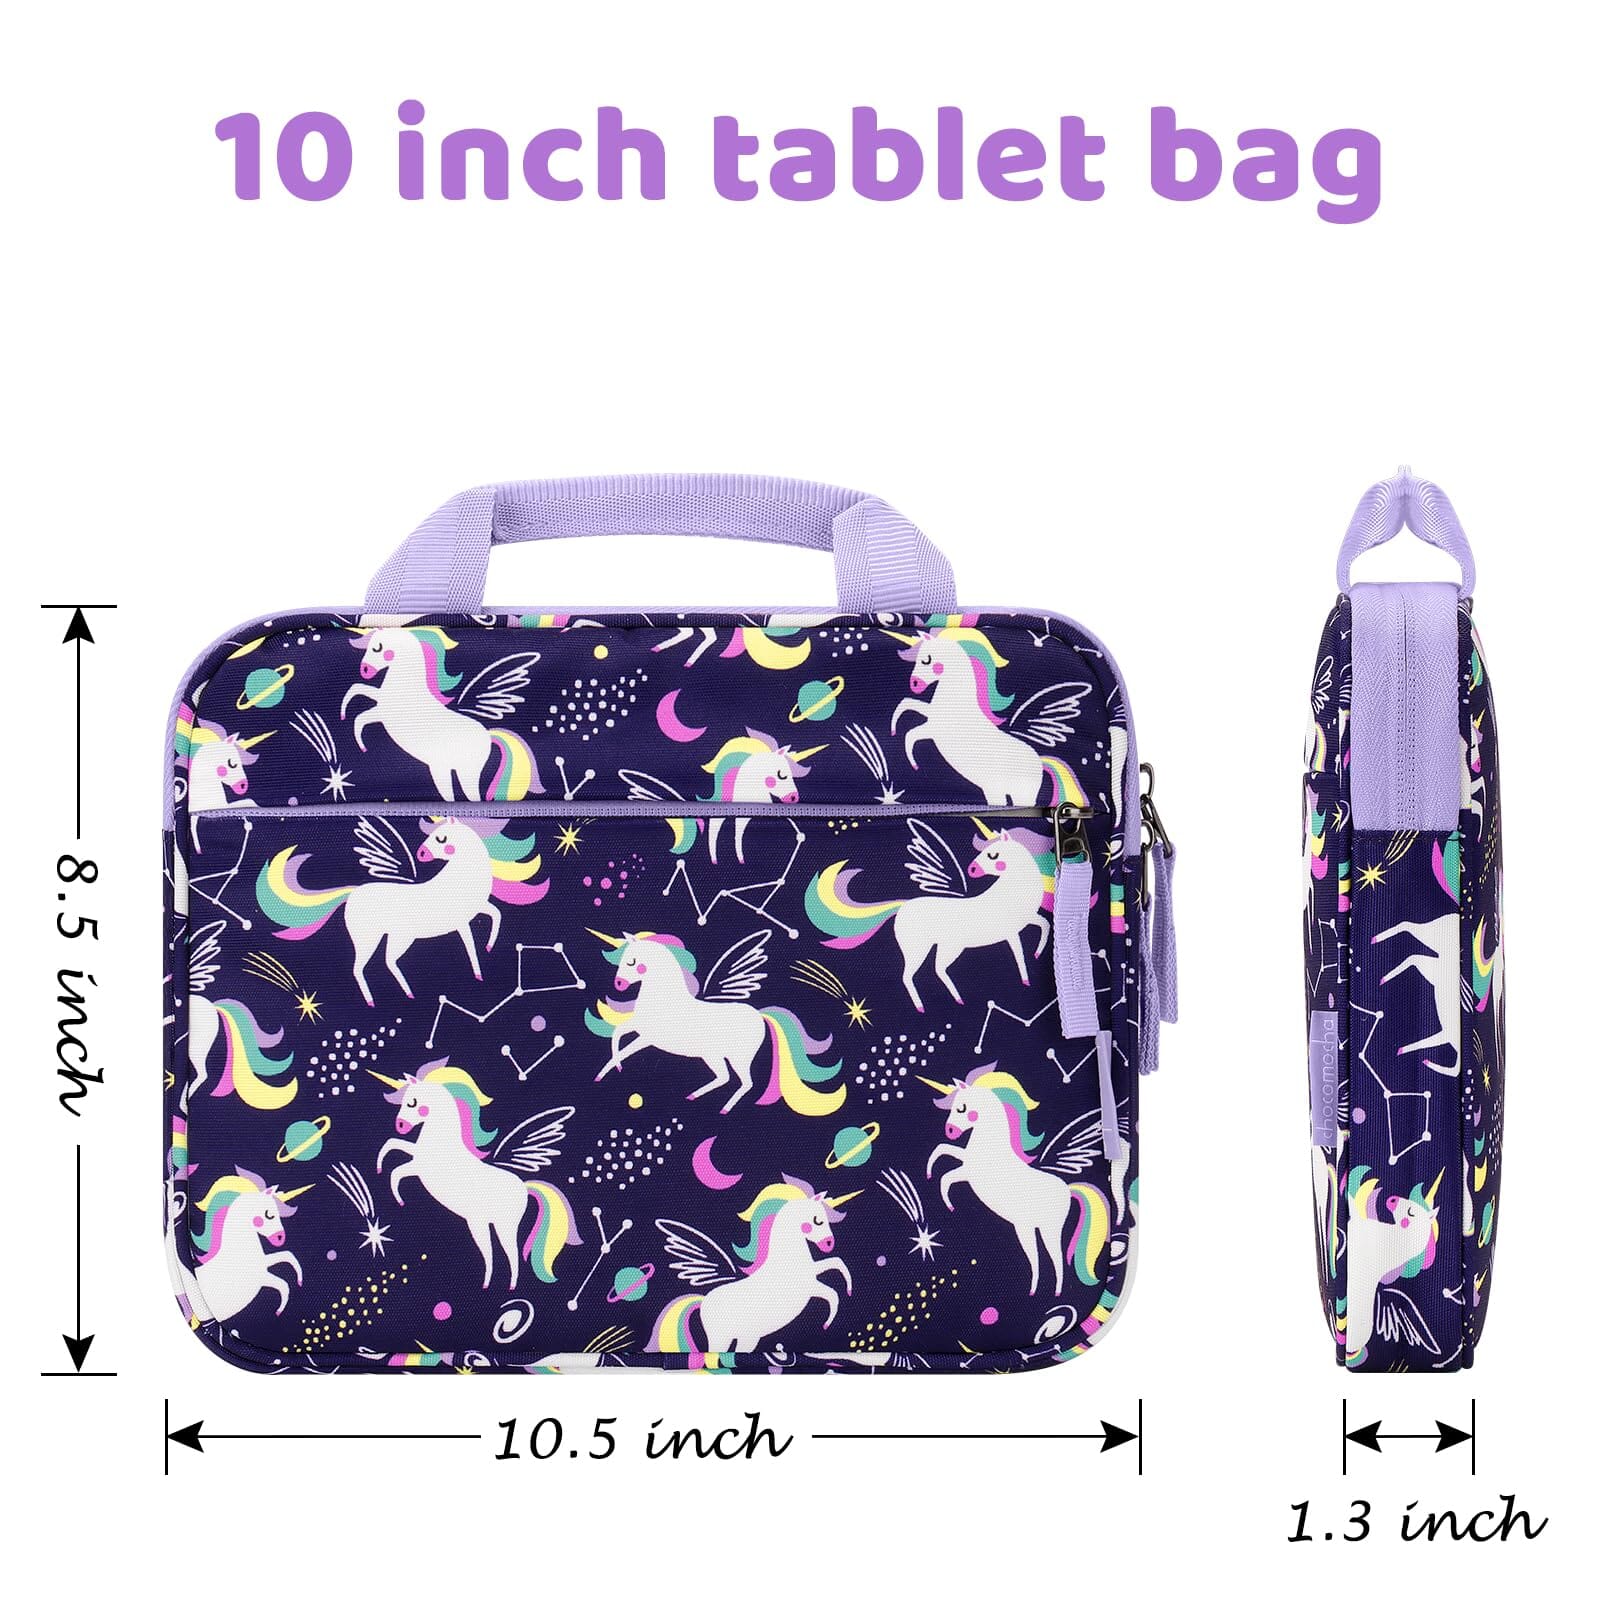 Choco Mocha 11 Inch Kids Tablet Sleeve Bag for Girls, Kids Tablet Carrying Case for Fire 7, Fire HD 8 Tablet, Kindle Kids Edition, iPad, Unicorn, Purple chocomochakids 